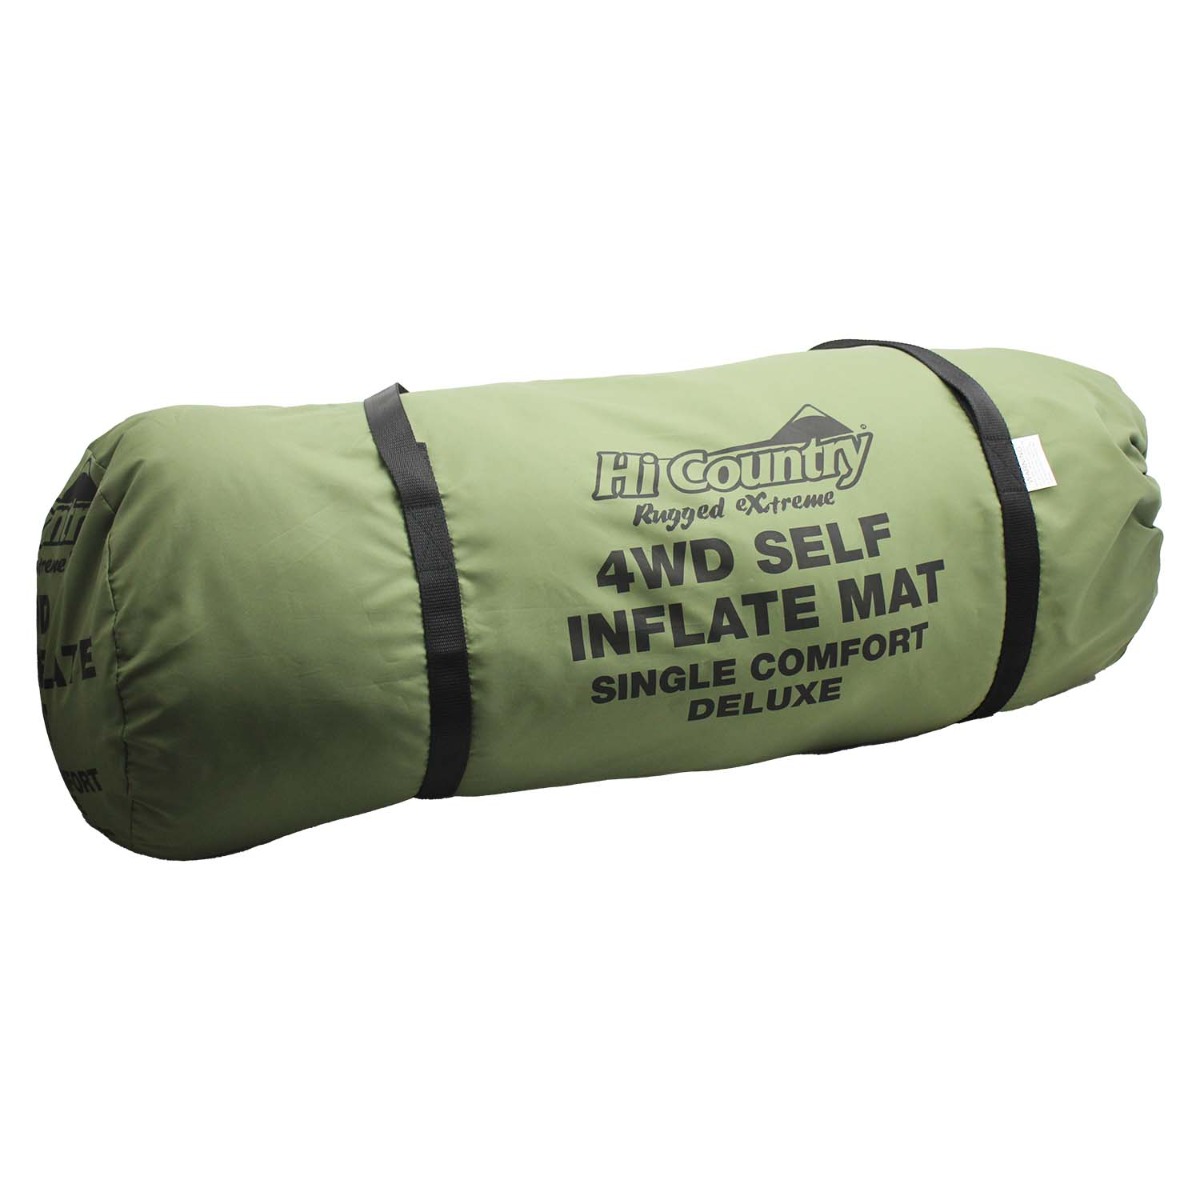 HI-COUNTRY Single RUGGED EXTREME 4WD MAT 